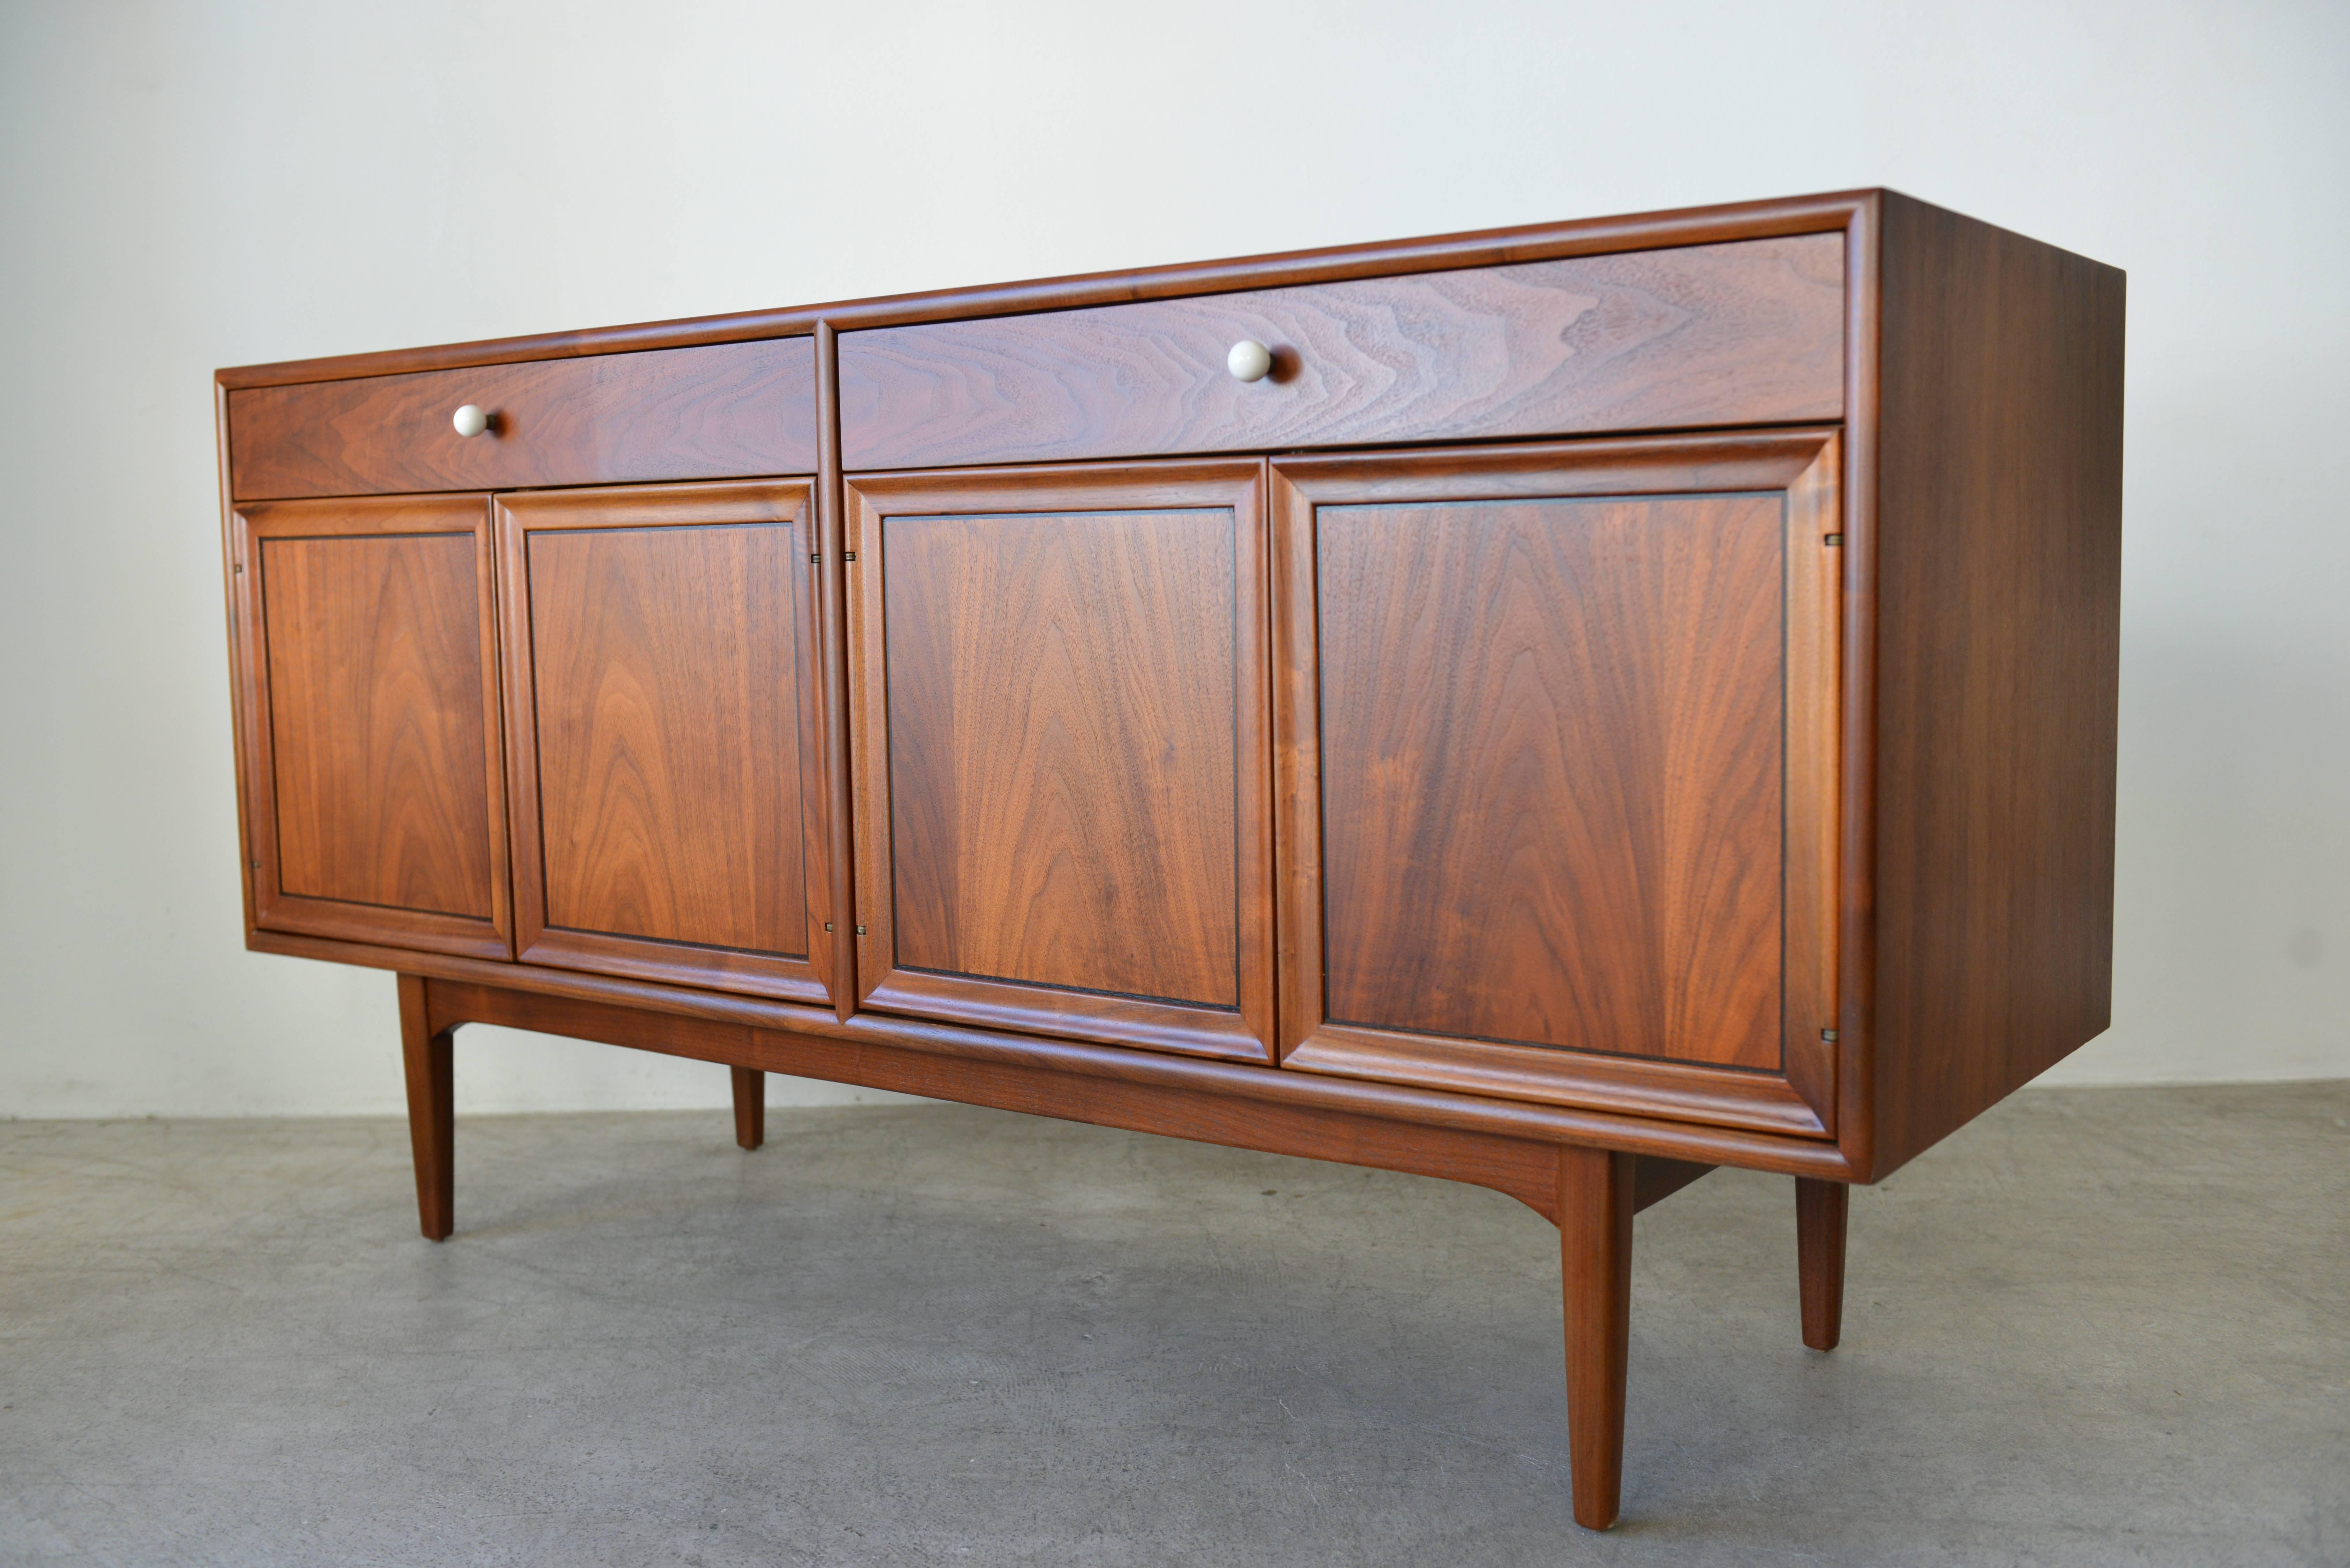 This Kipp Stewart walnut credenza by Drexel Declaration. Beautiful bookend matched doors with original porcelain pulls. Interior lights come on with the doors open. Shelves are adjustable.

Condition is excellent, restored to showroom